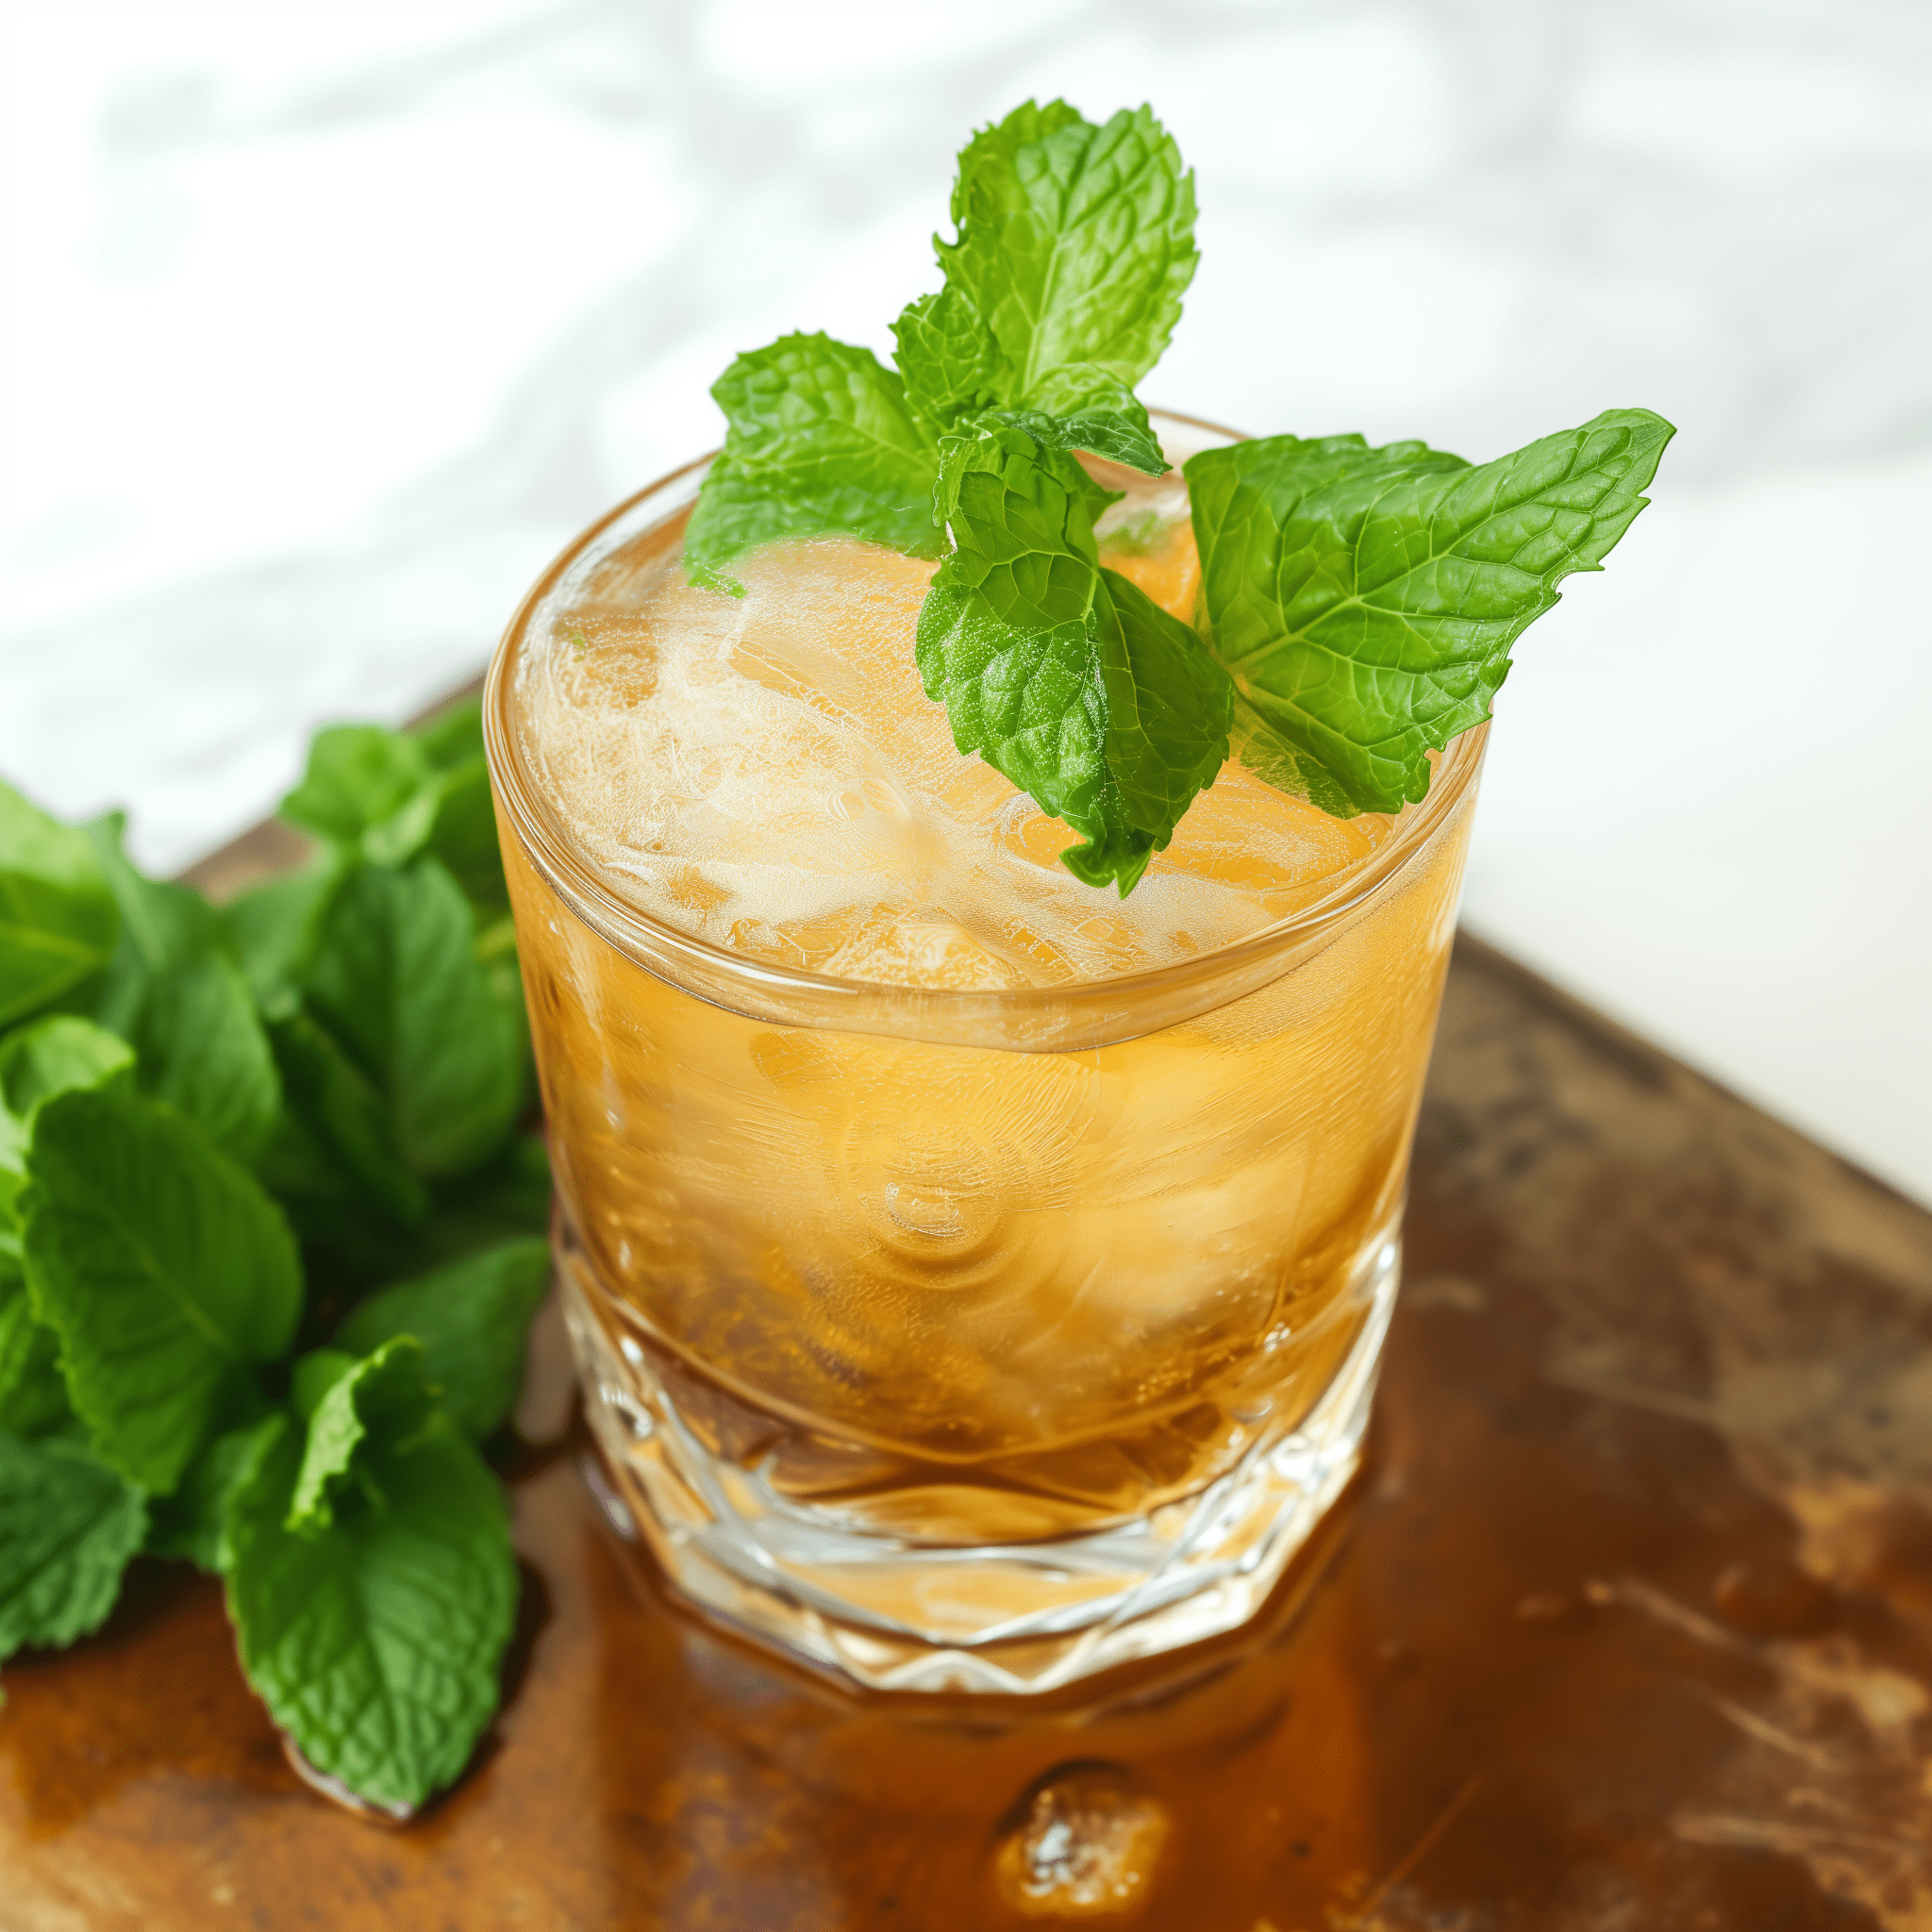 Mint Julep Mocktail Recipe - This Mint Julep Mocktail is a symphony of freshness with a minty aroma that tickles the senses. It's sweet, but not cloying, with a subtle herbal undertone from the mint. The crushed ice makes it incredibly refreshing and perfect for cooling down on a hot day.